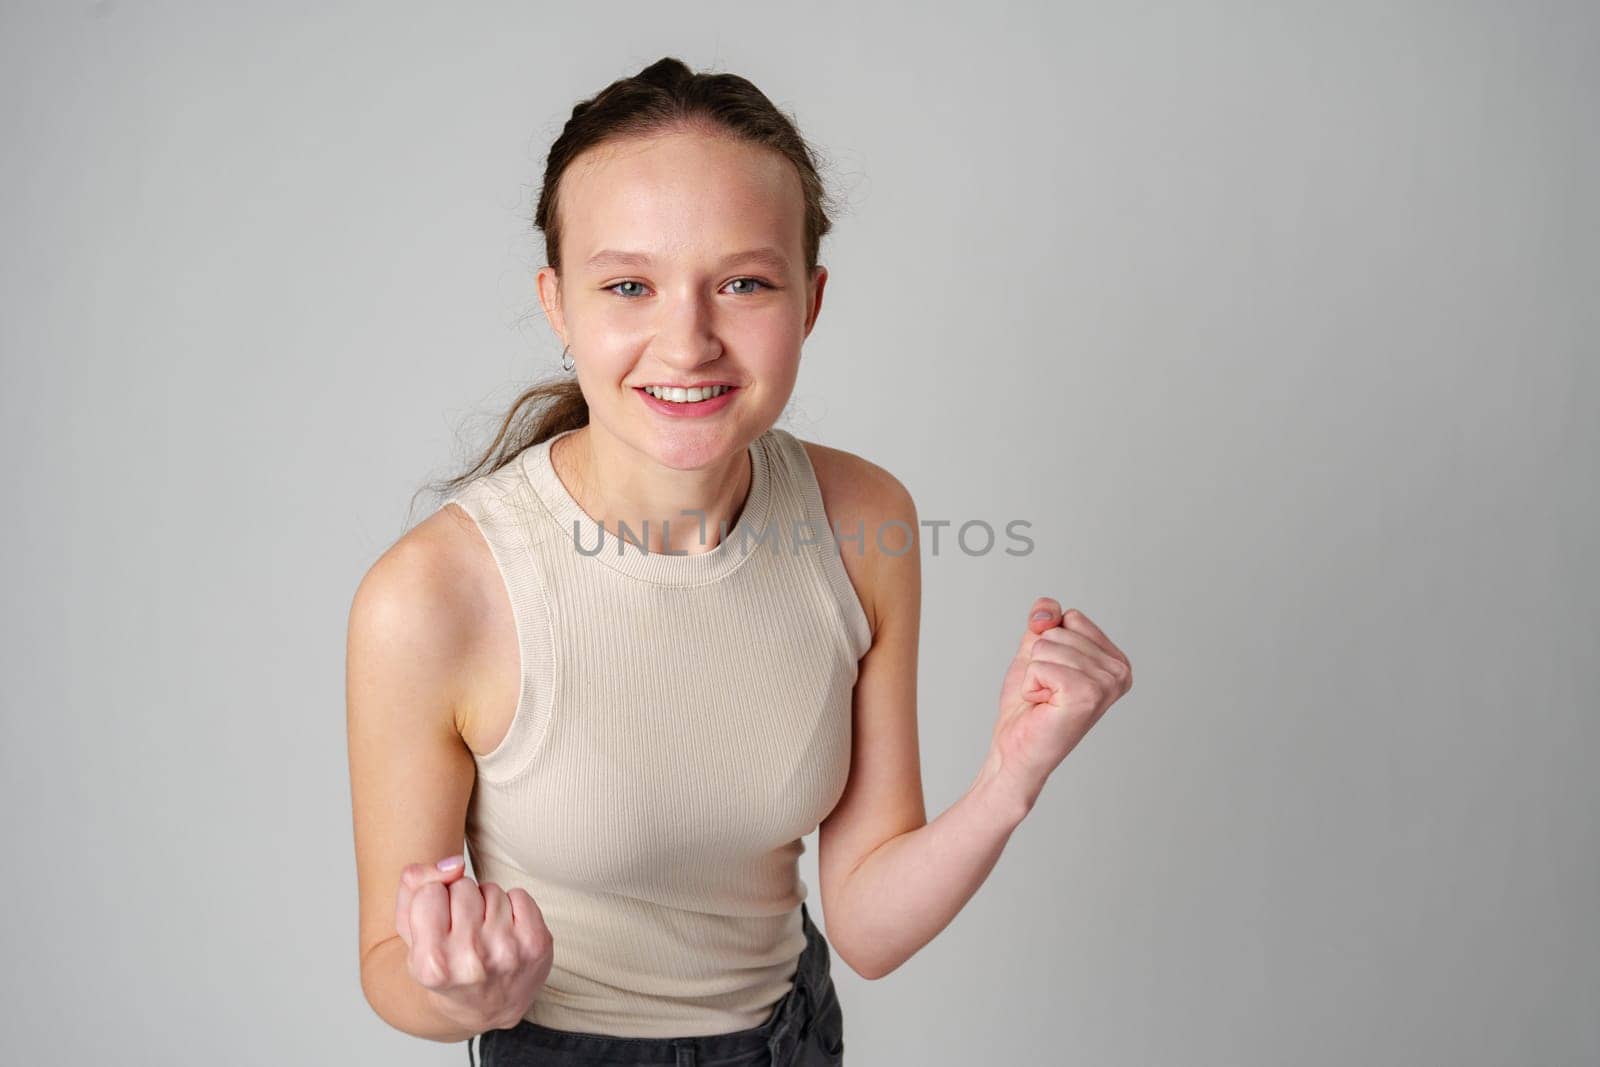 Young Woman in Casual Attire Smiling and Making a Fist Pump Gesture on a Plain Background by Fabrikasimf